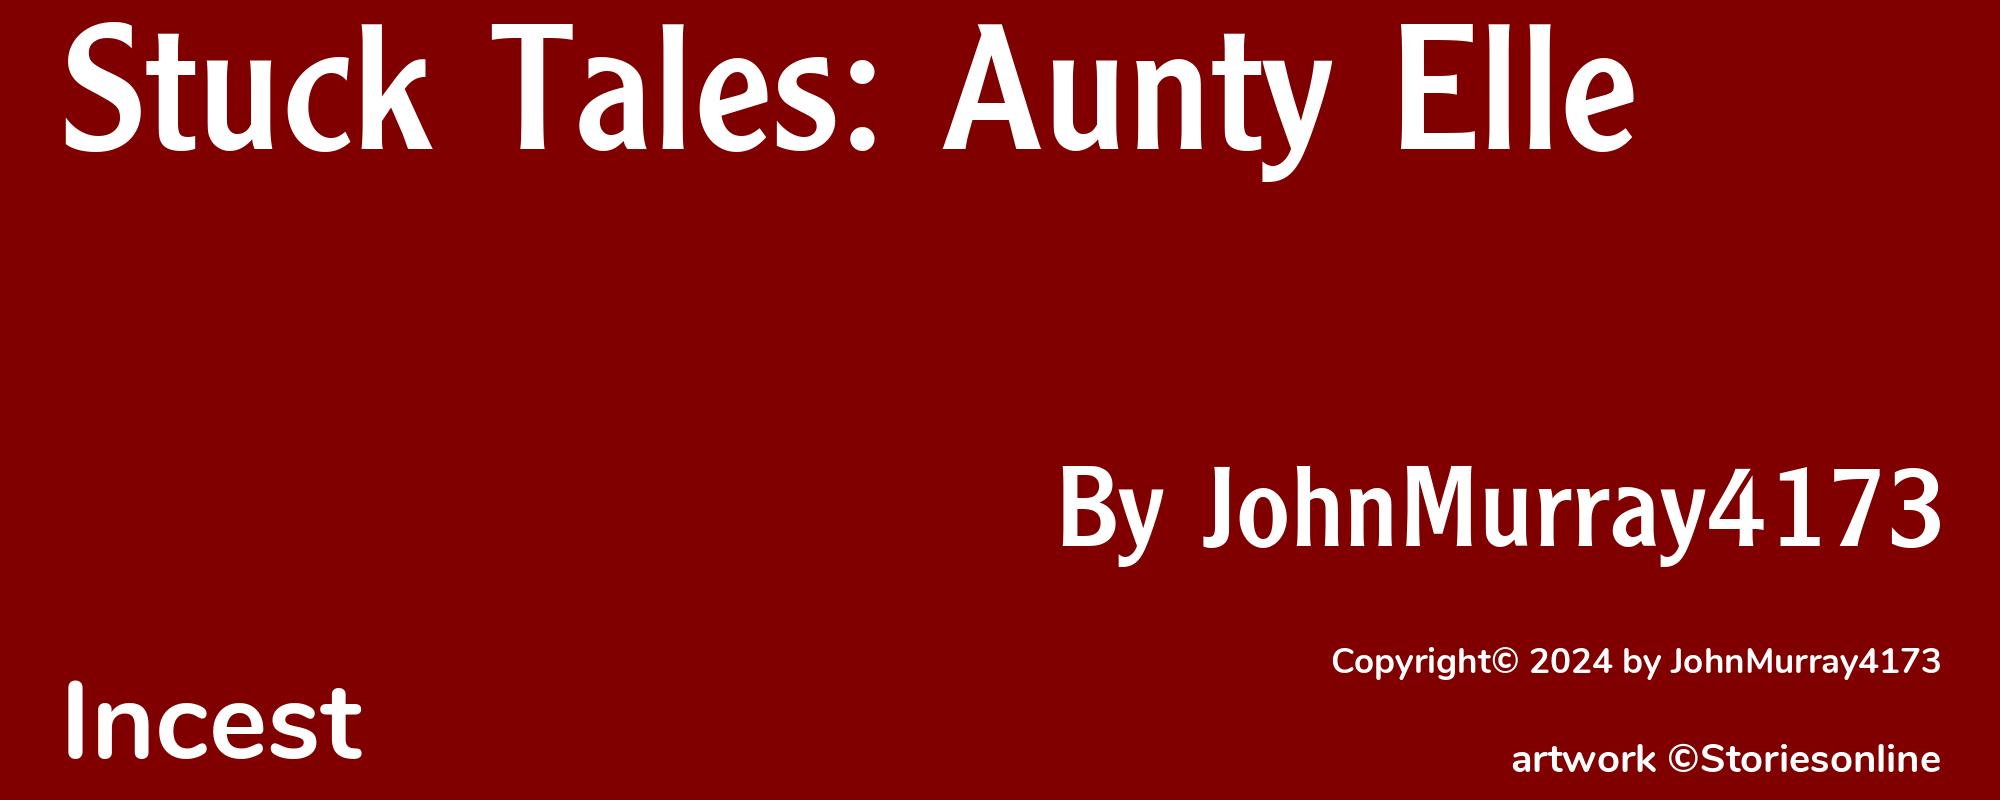 Stuck Tales: Aunty Elle - Cover